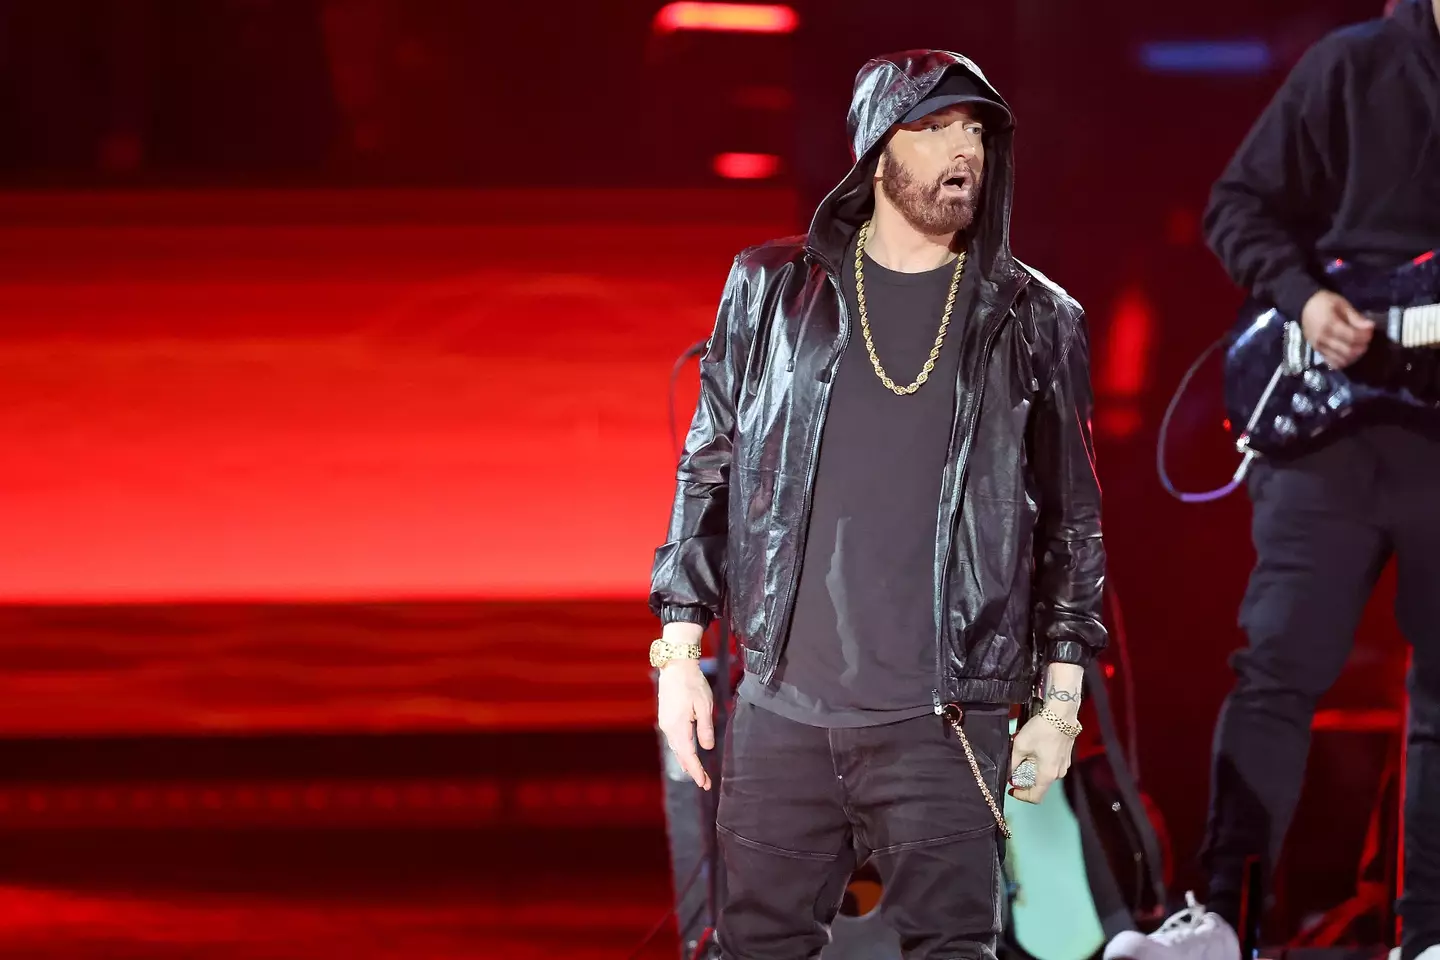 Eminem's skin tone has been a topic of discussion throughout his career.